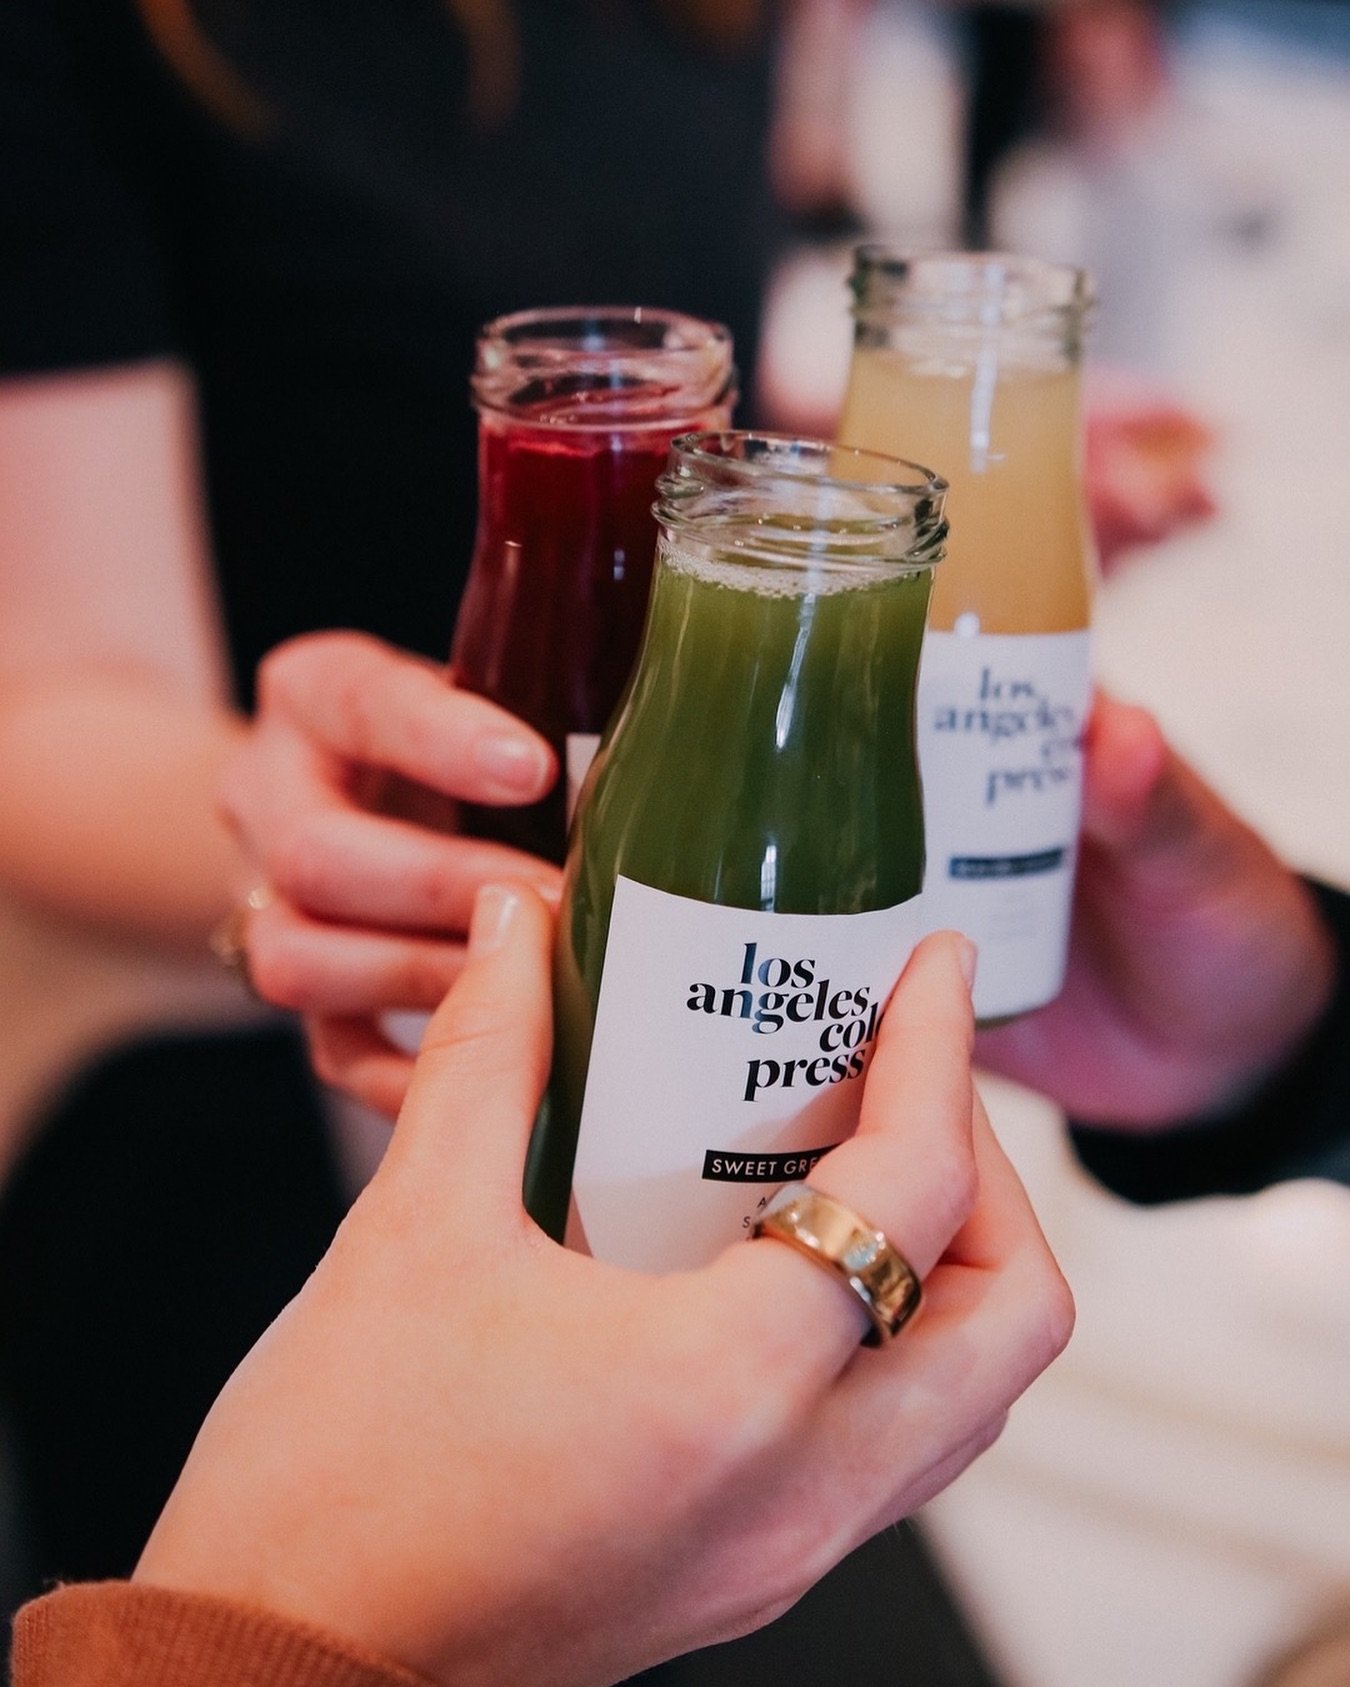 Spring is the season of renewal! Reset and revitalize with our cleanse options, and consider embarking on this journey together or in a community for added support and motivation:

Rainbow Cleanse: Experience a colorful boost of energy from nature fo